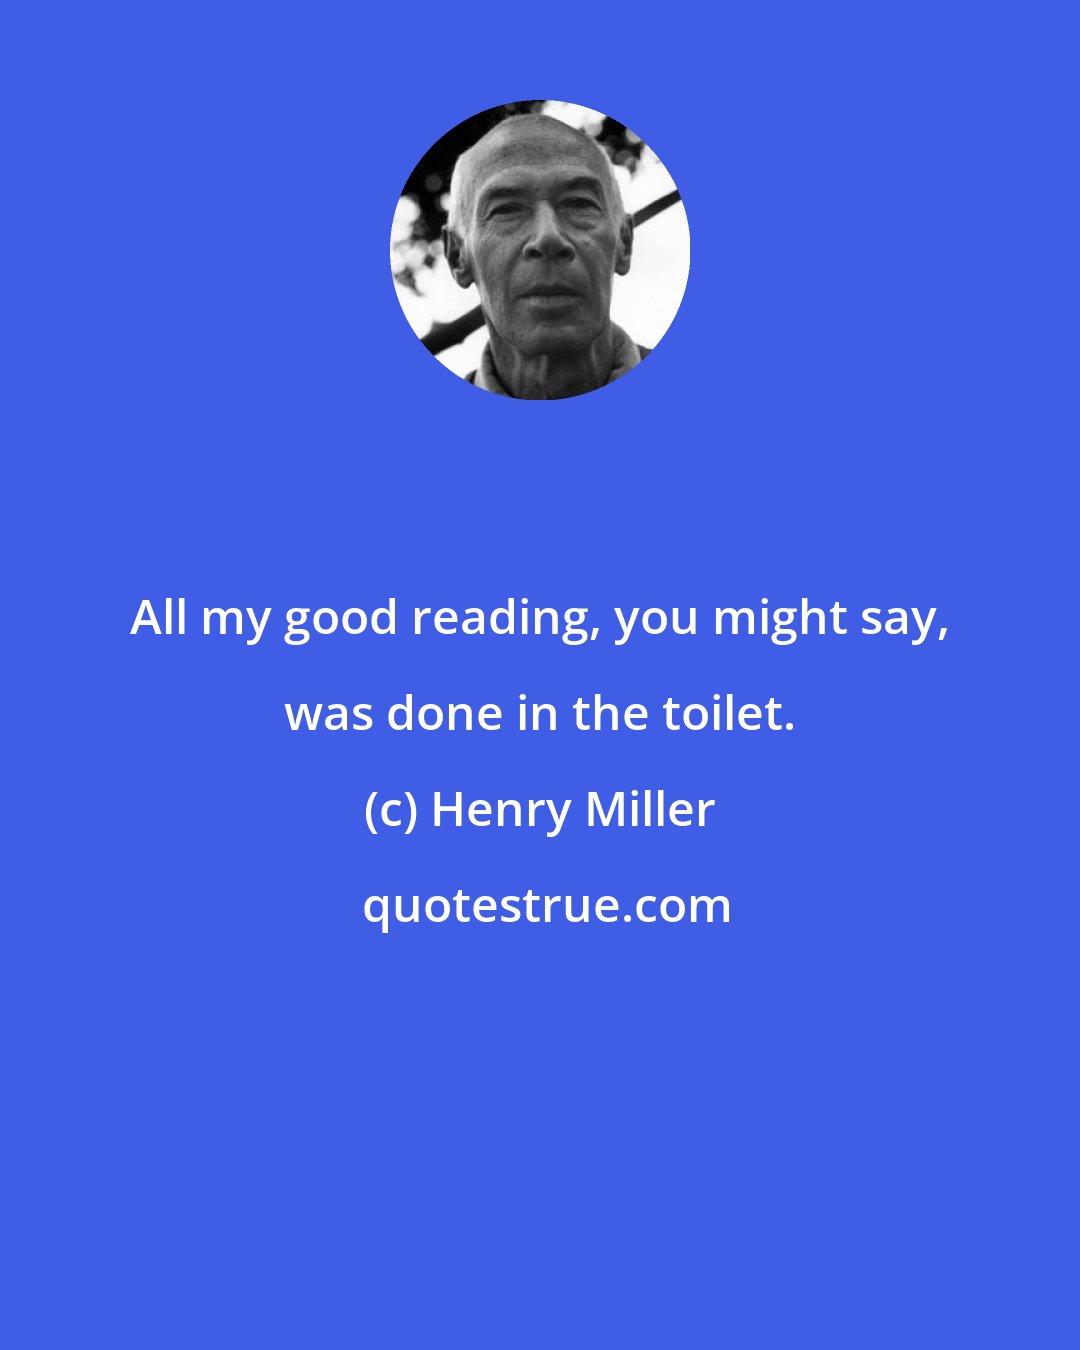 Henry Miller: All my good reading, you might say, was done in the toilet.